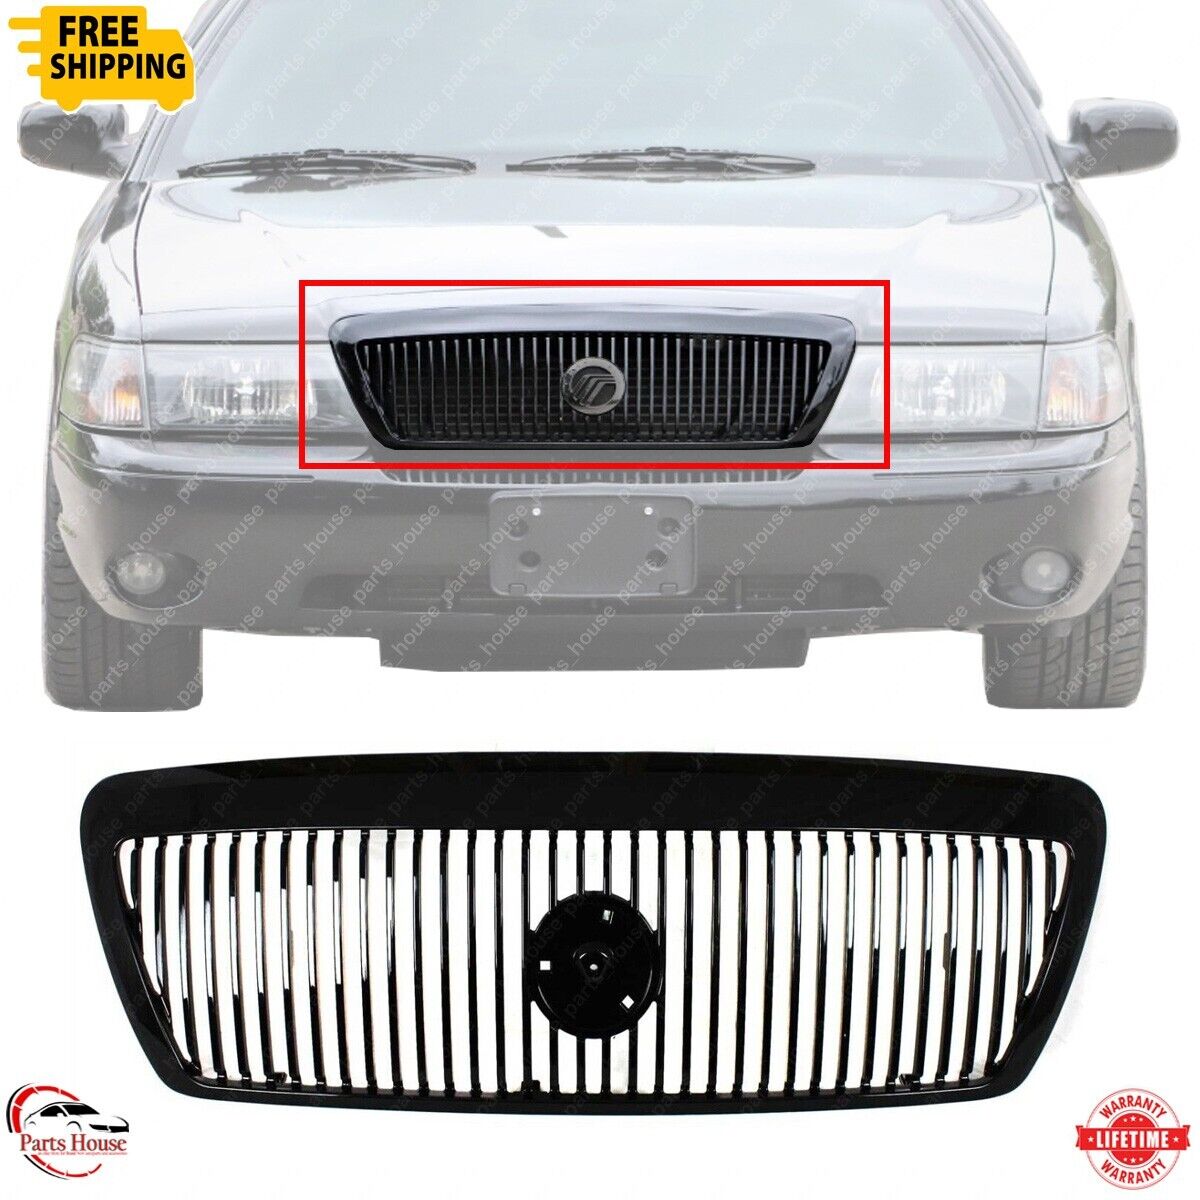 For 2003-2004 Mercury Grand Marquis Marauder New Front Grille Black FO1200409